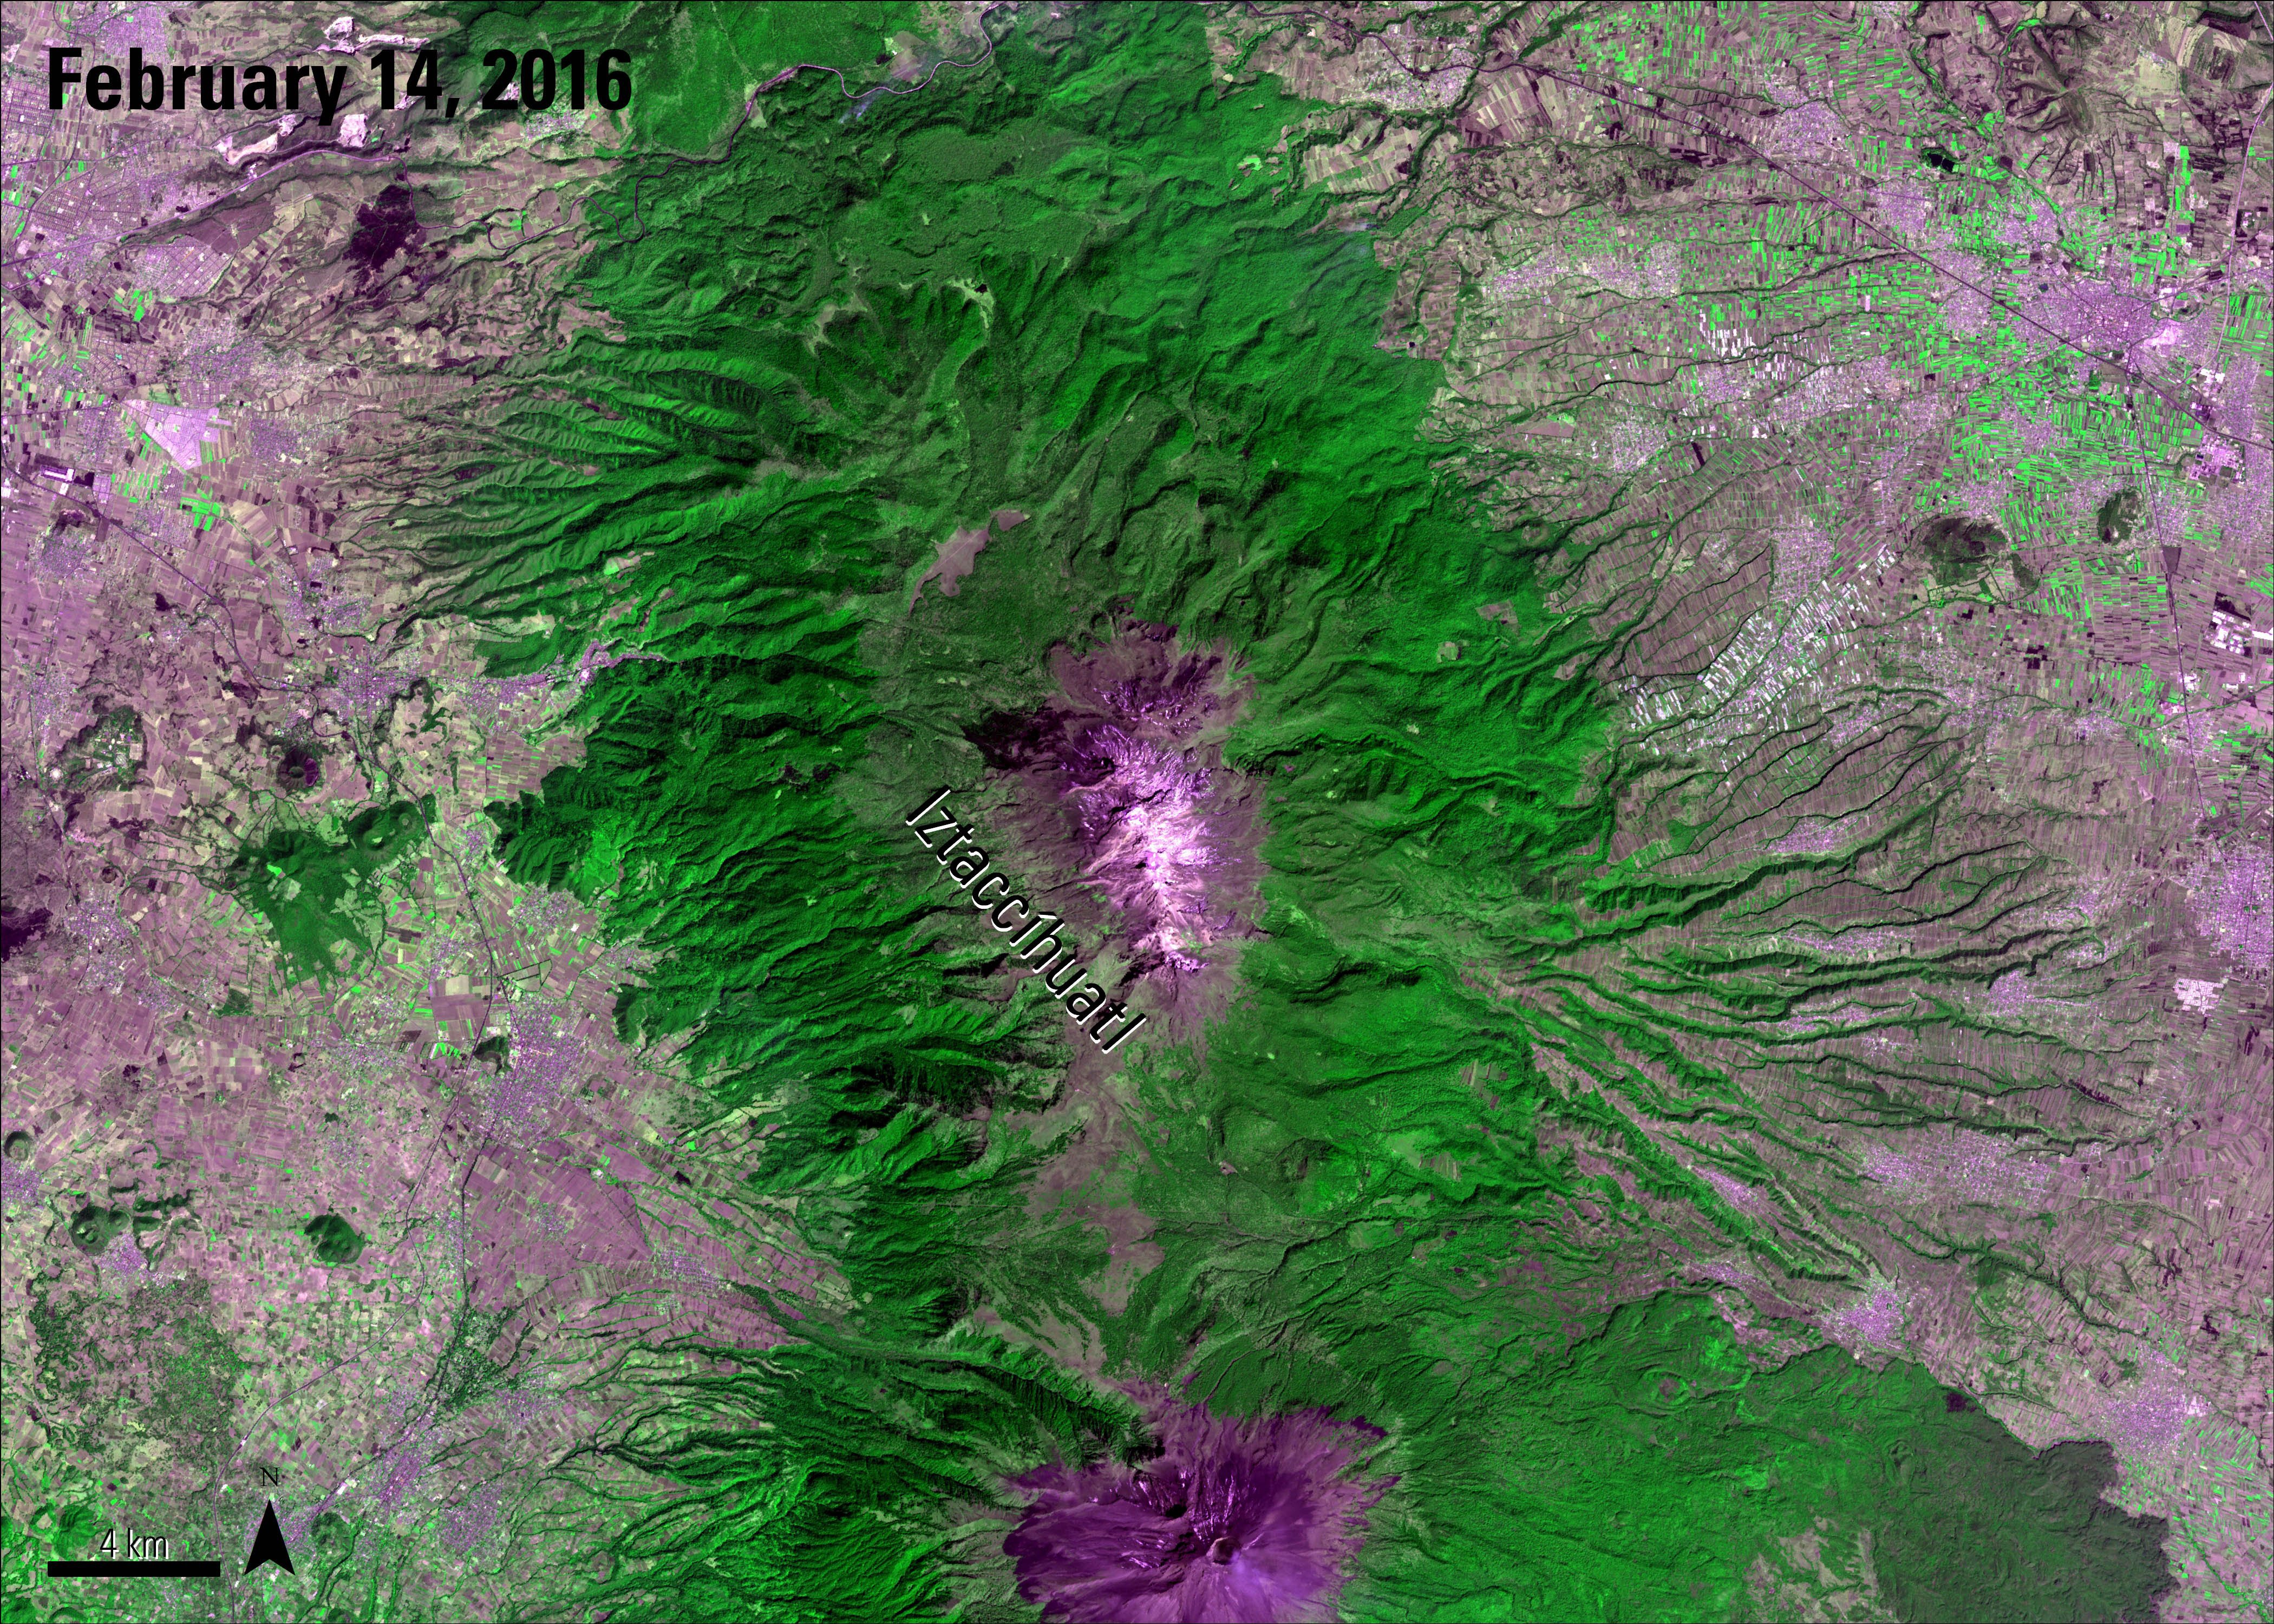 Terra ASTER Surface Radiance image of Mount Iztaccíhuatl, Mexico with labels, acquired February 14, 2016.